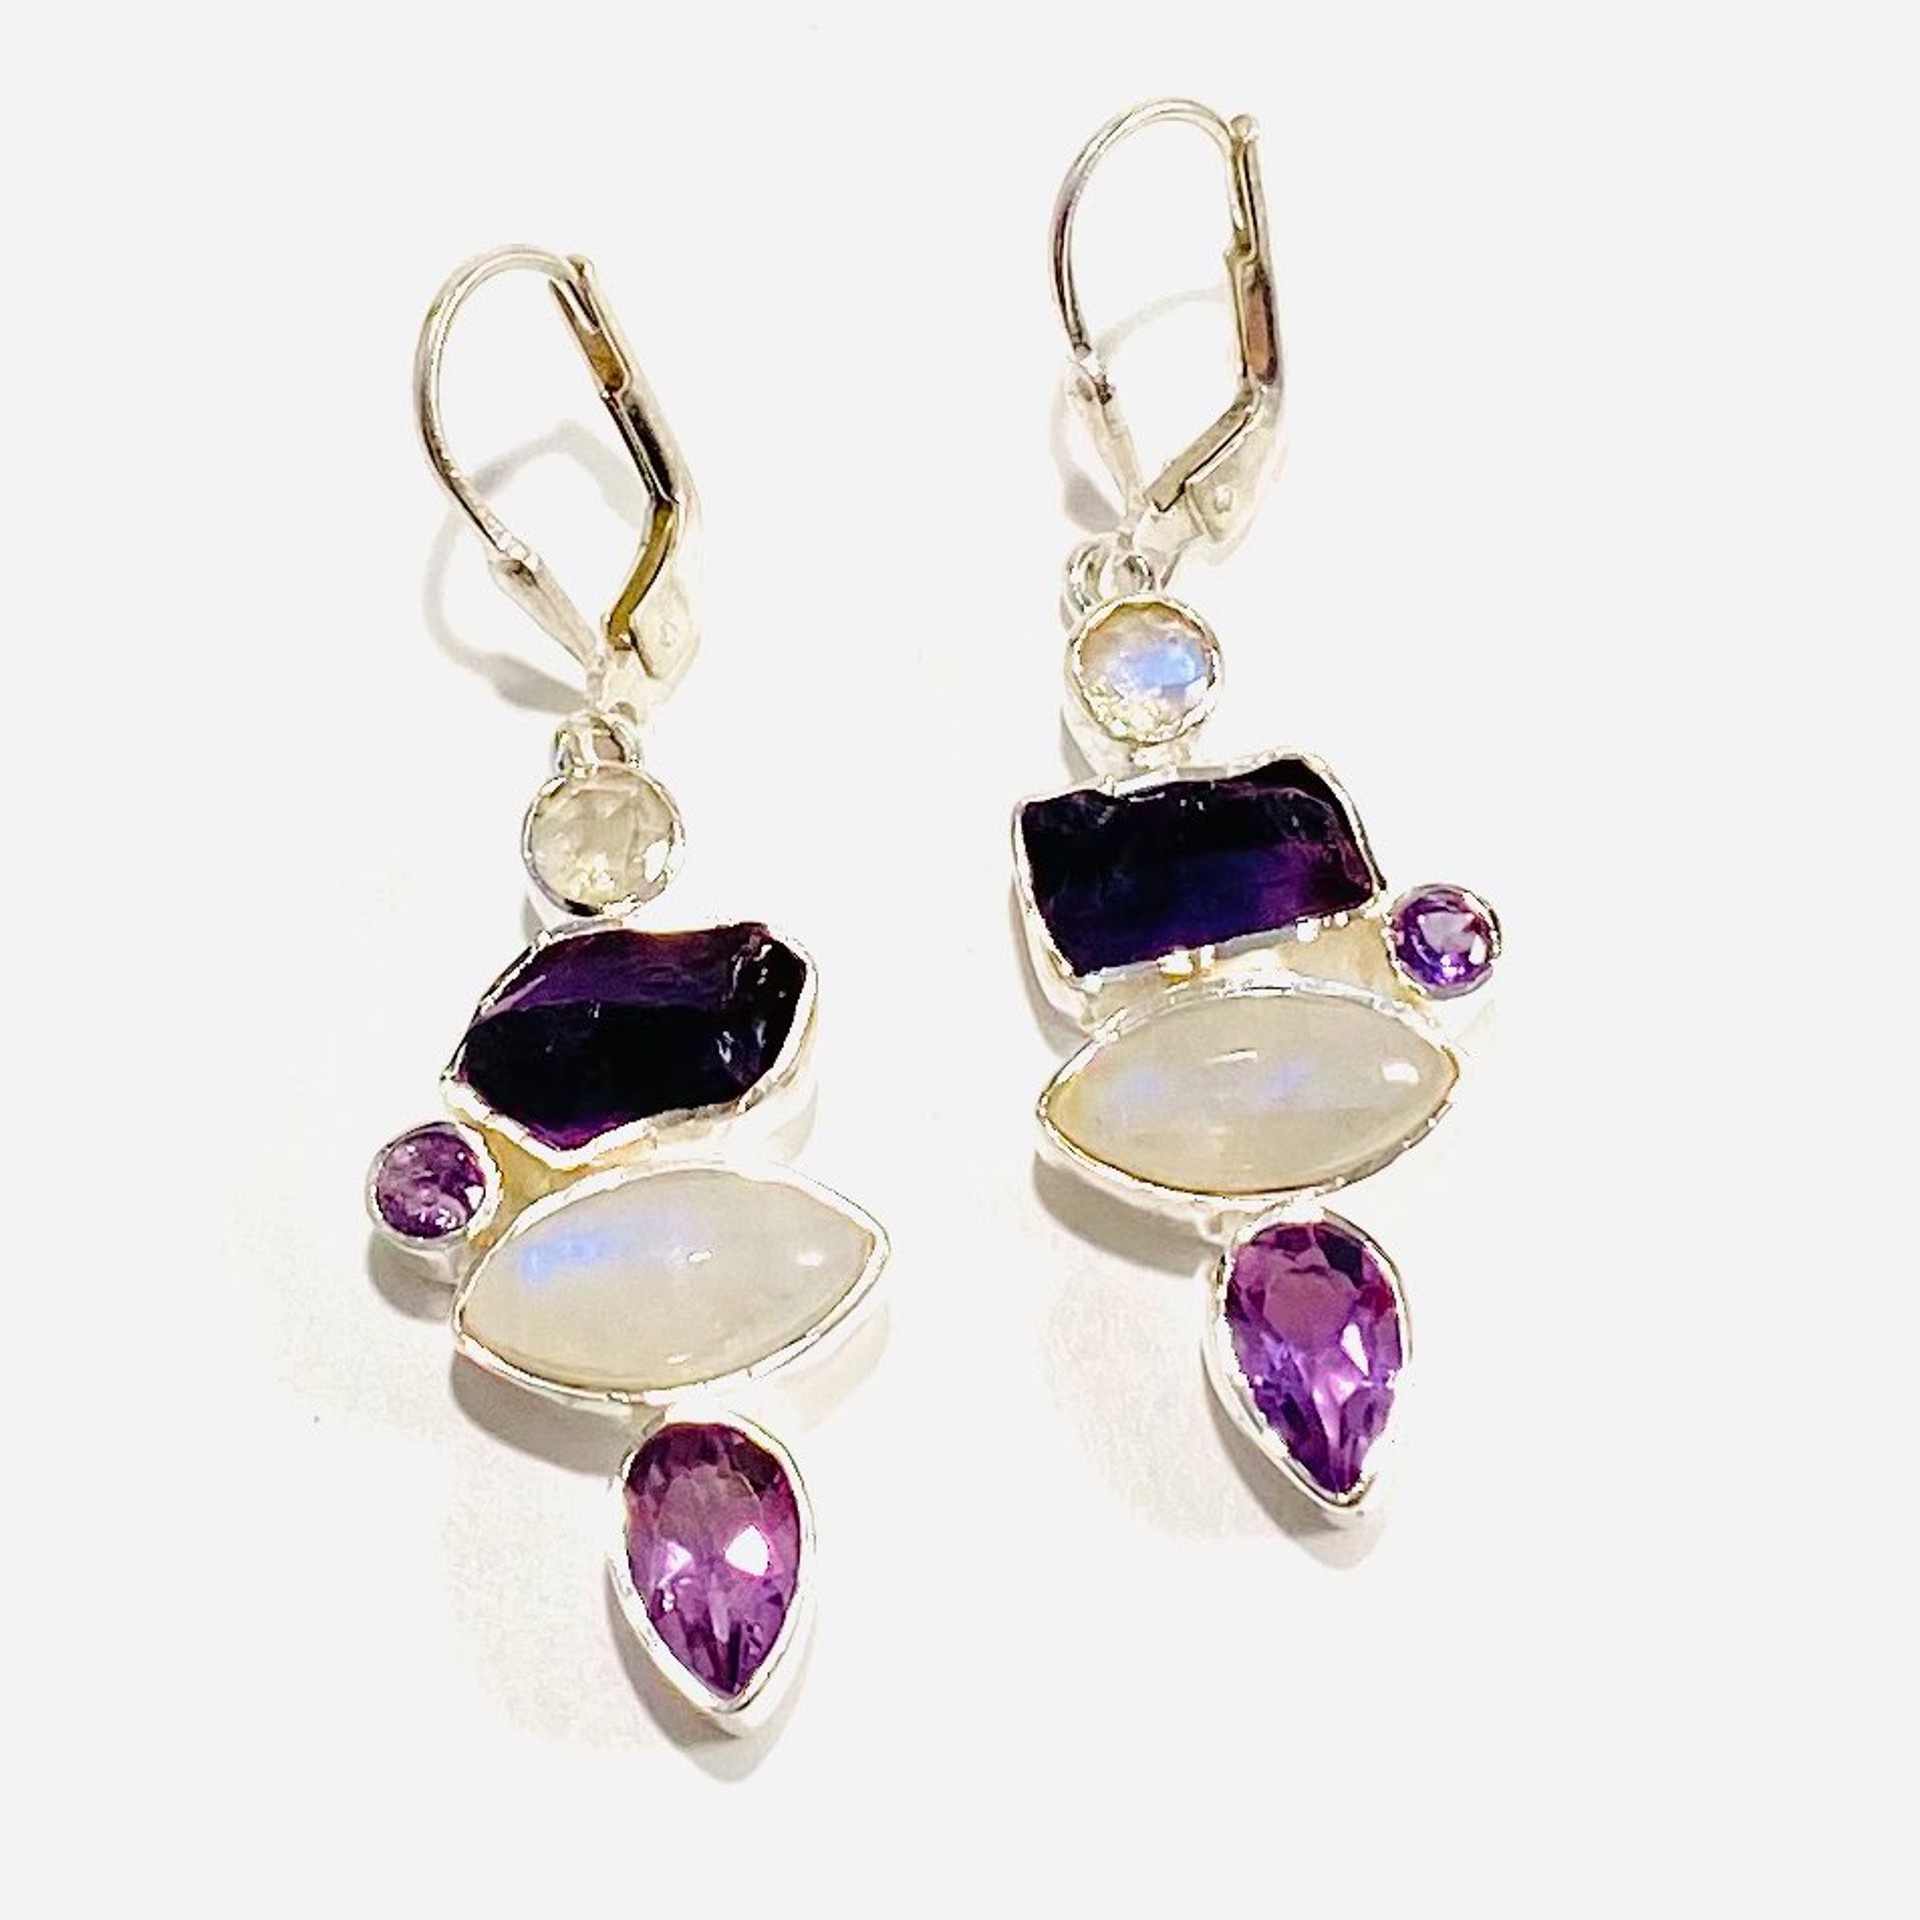 MON22-13 Moonstone, Rough and Faceted Amethyst Earrings by Monica Mehta